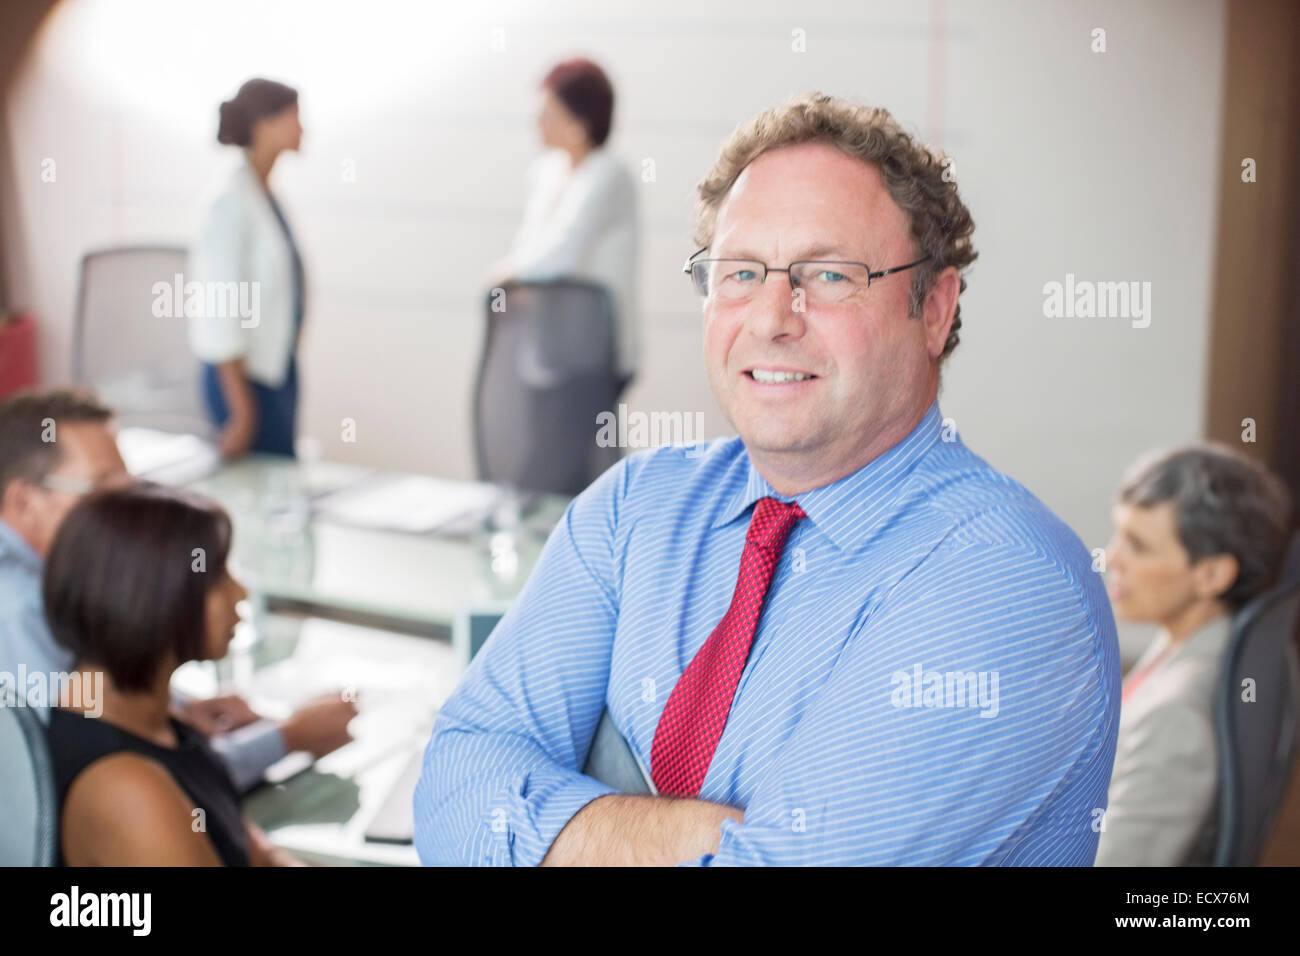 Portrait of mature man wearing glasses in conference room Stock Photo